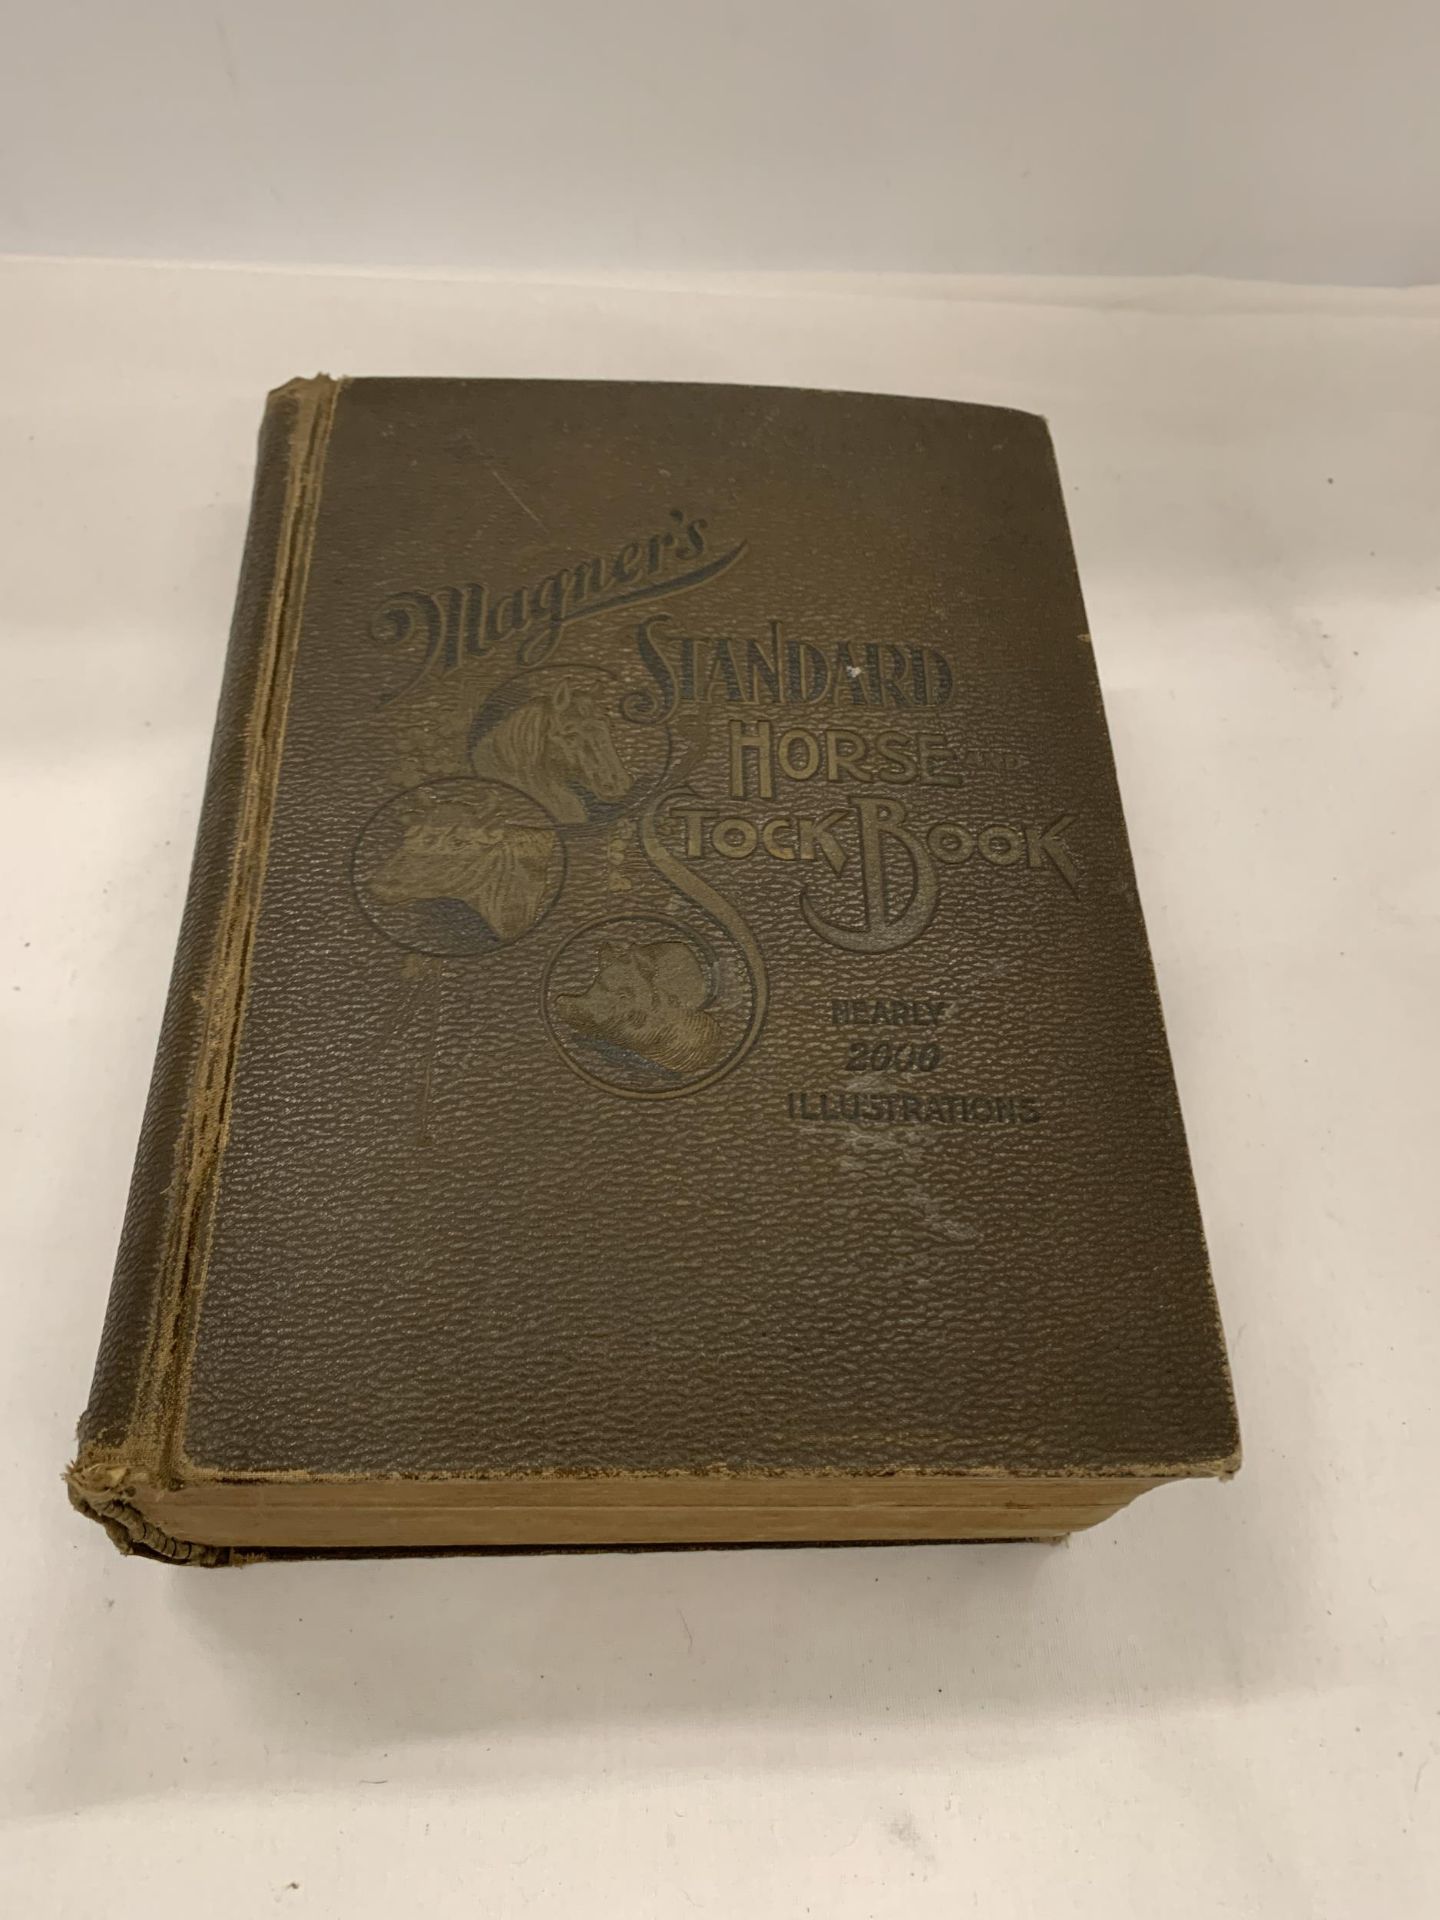 A 1906 MAGNER'S STANDARD HORSE AND STOCK BOOK